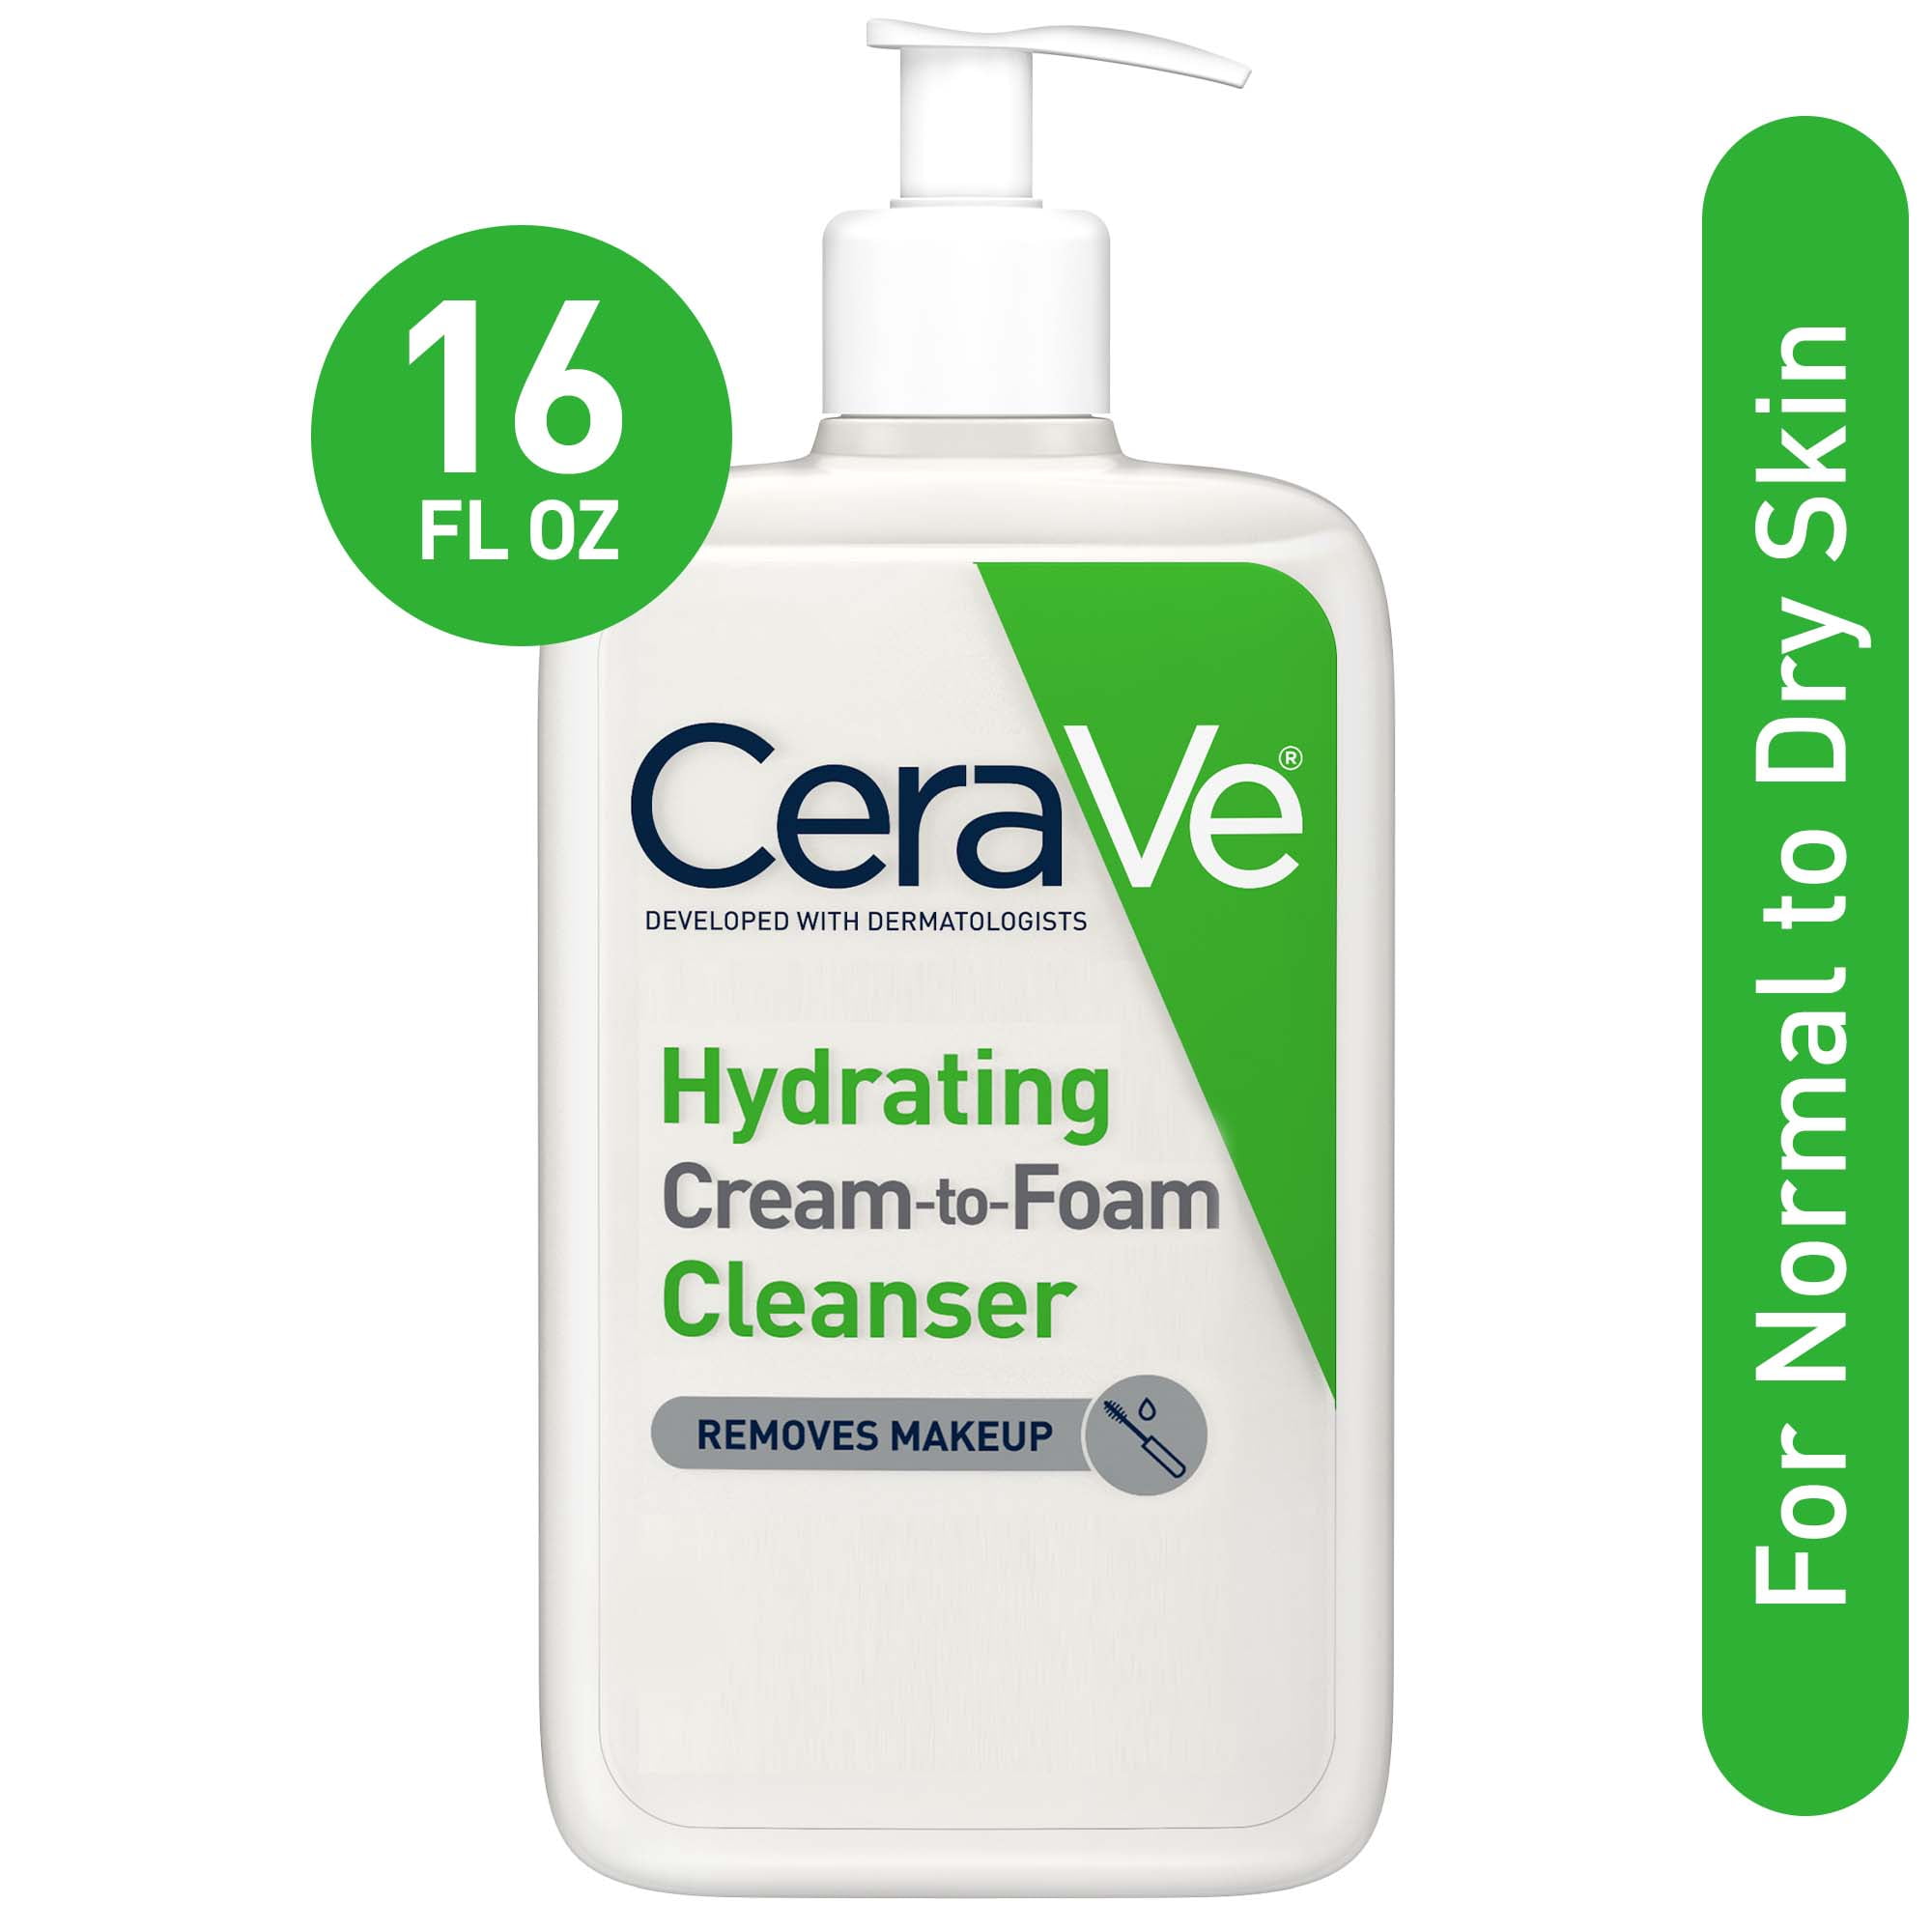 CeraVe Hydrating Cream-to-Foam Cleanser, Fragrance Free Makeup Remover with Hyaluronic Acid for Dry Skin, 16 fl oz